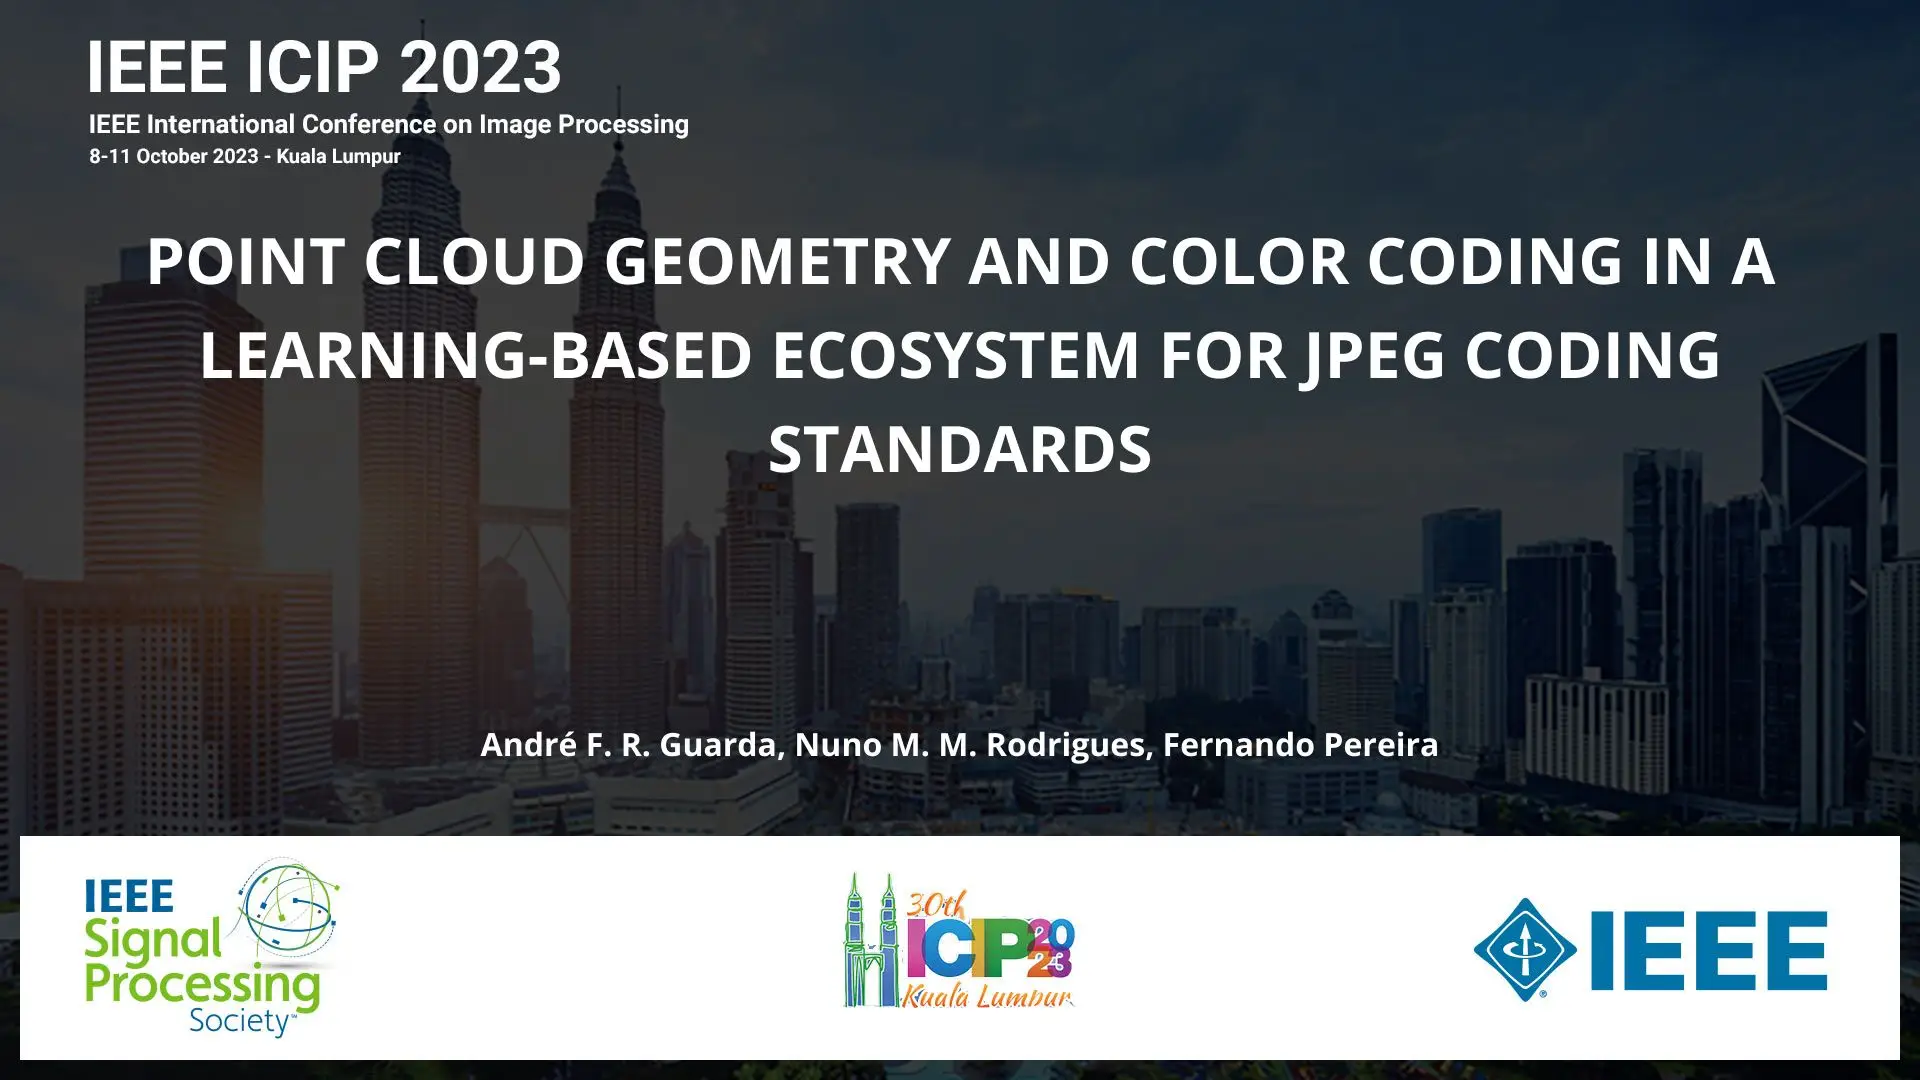 POINT CLOUD GEOMETRY AND COLOR CODING IN A LEARNING-BASED ECOSYSTEM FOR JPEG CODING STANDARDS